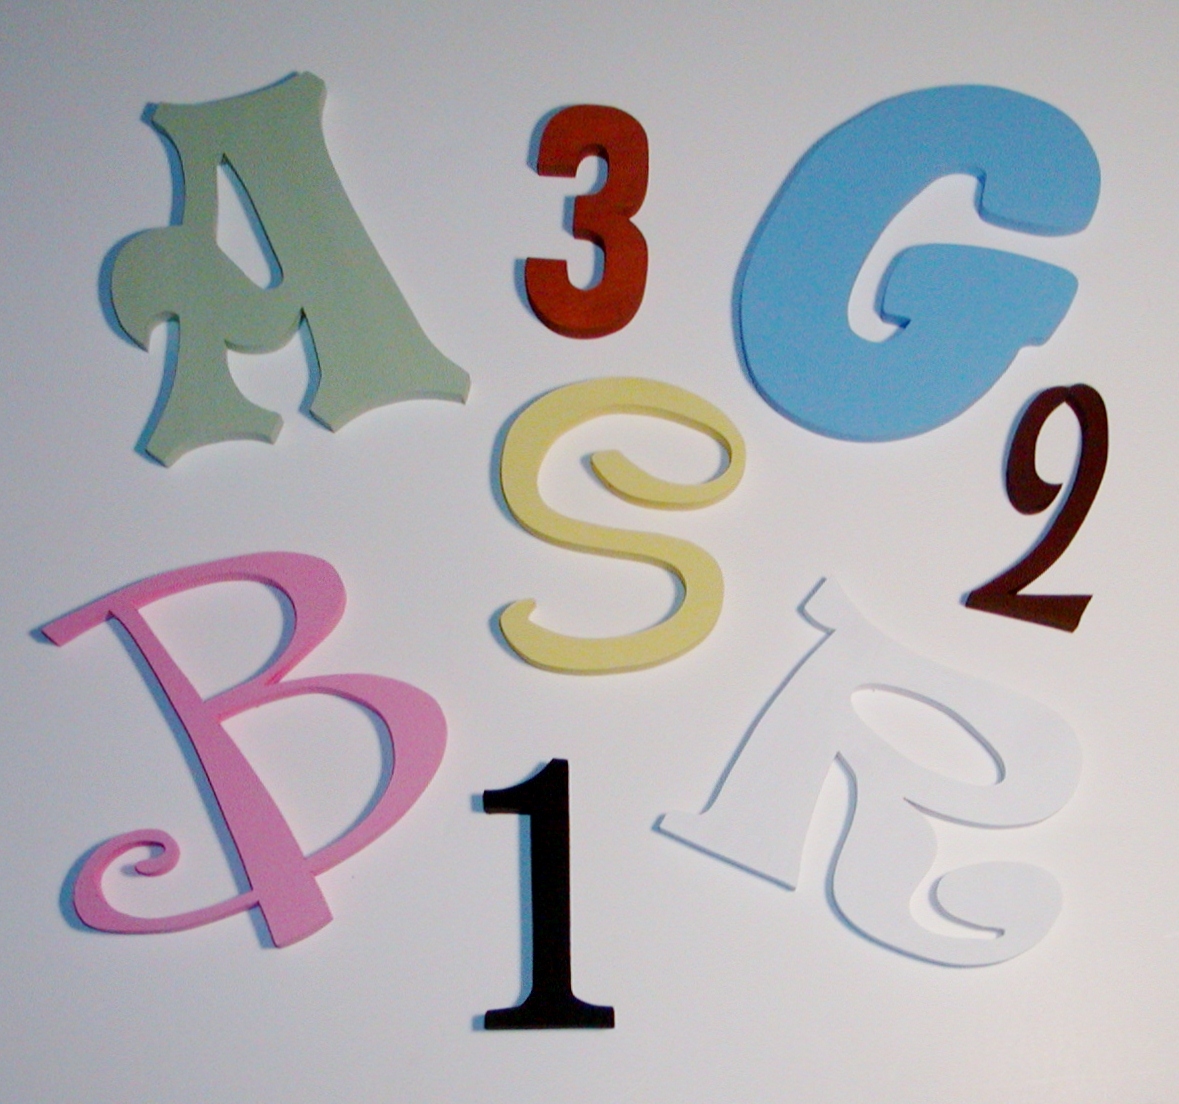 12 Inch Painted Wood Letters Wooden Letters Wall Letters Custom Sizes Available